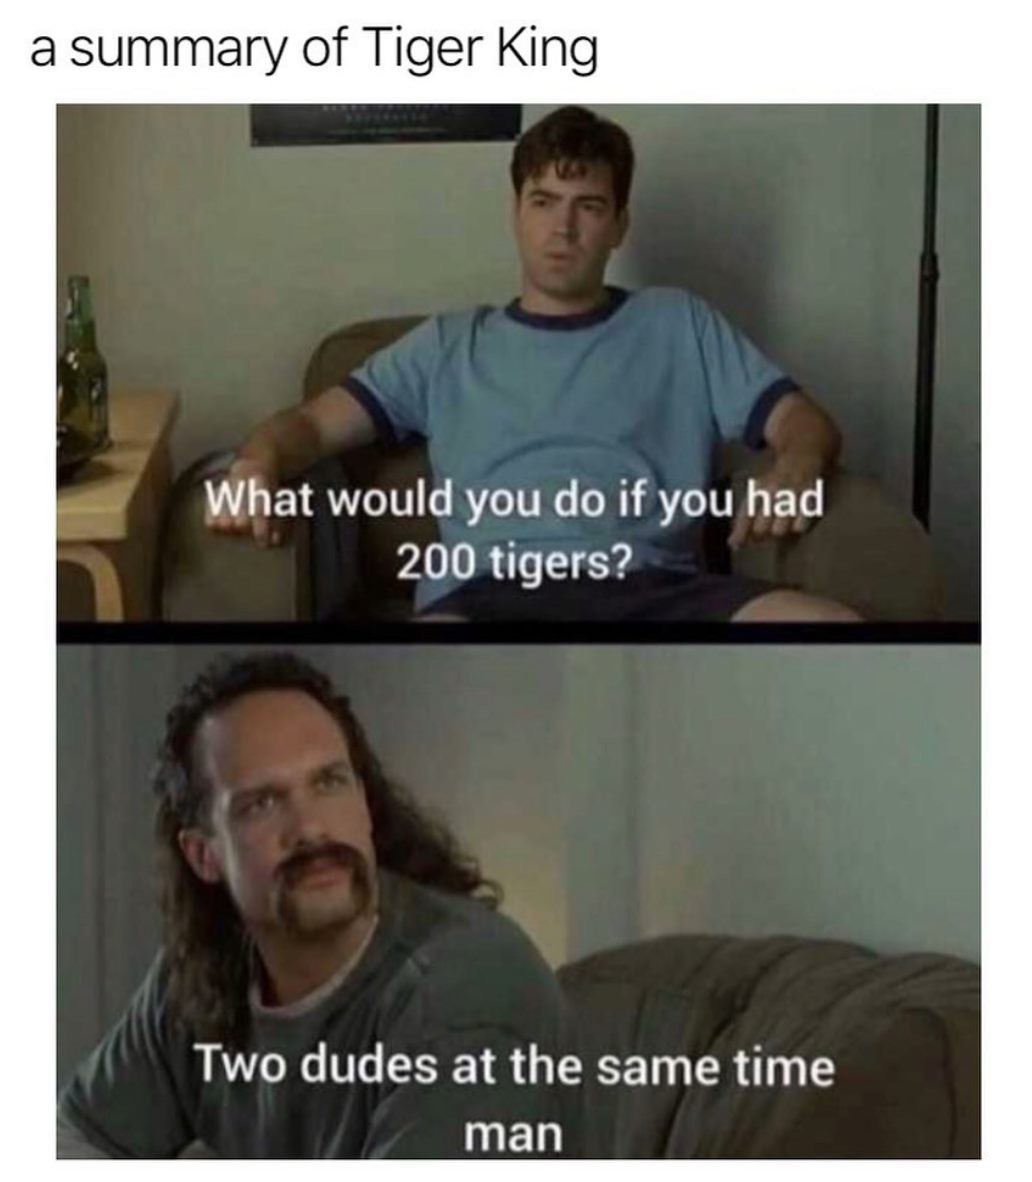 photo caption - a summary of Tiger King What would you do if you had 200 tigers? Two dudes at the same time man